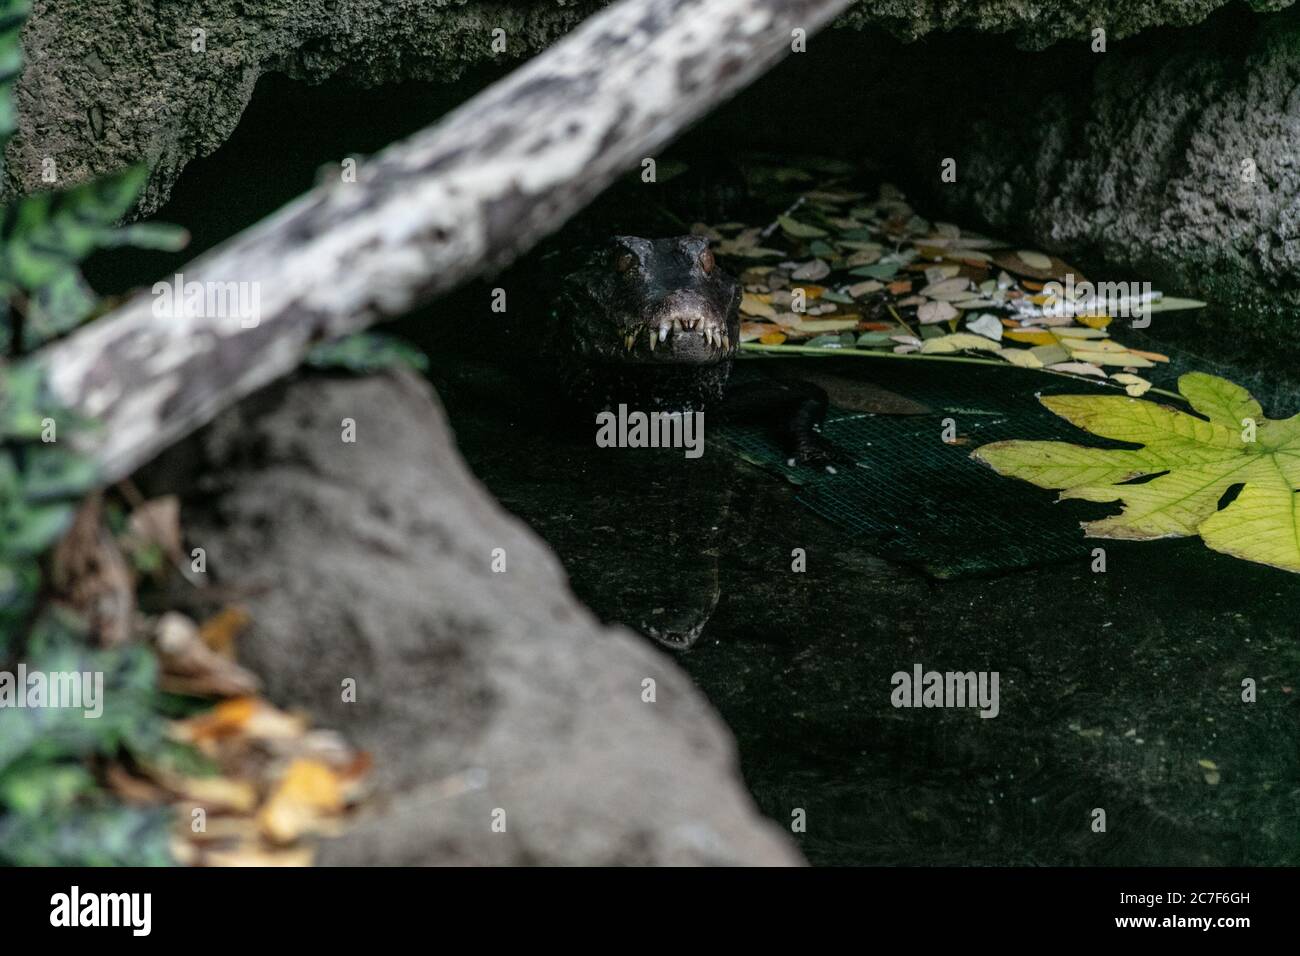 Alligator in a lake surrounded by tree branches and leaves under the sunlight during daytime Stock Photo